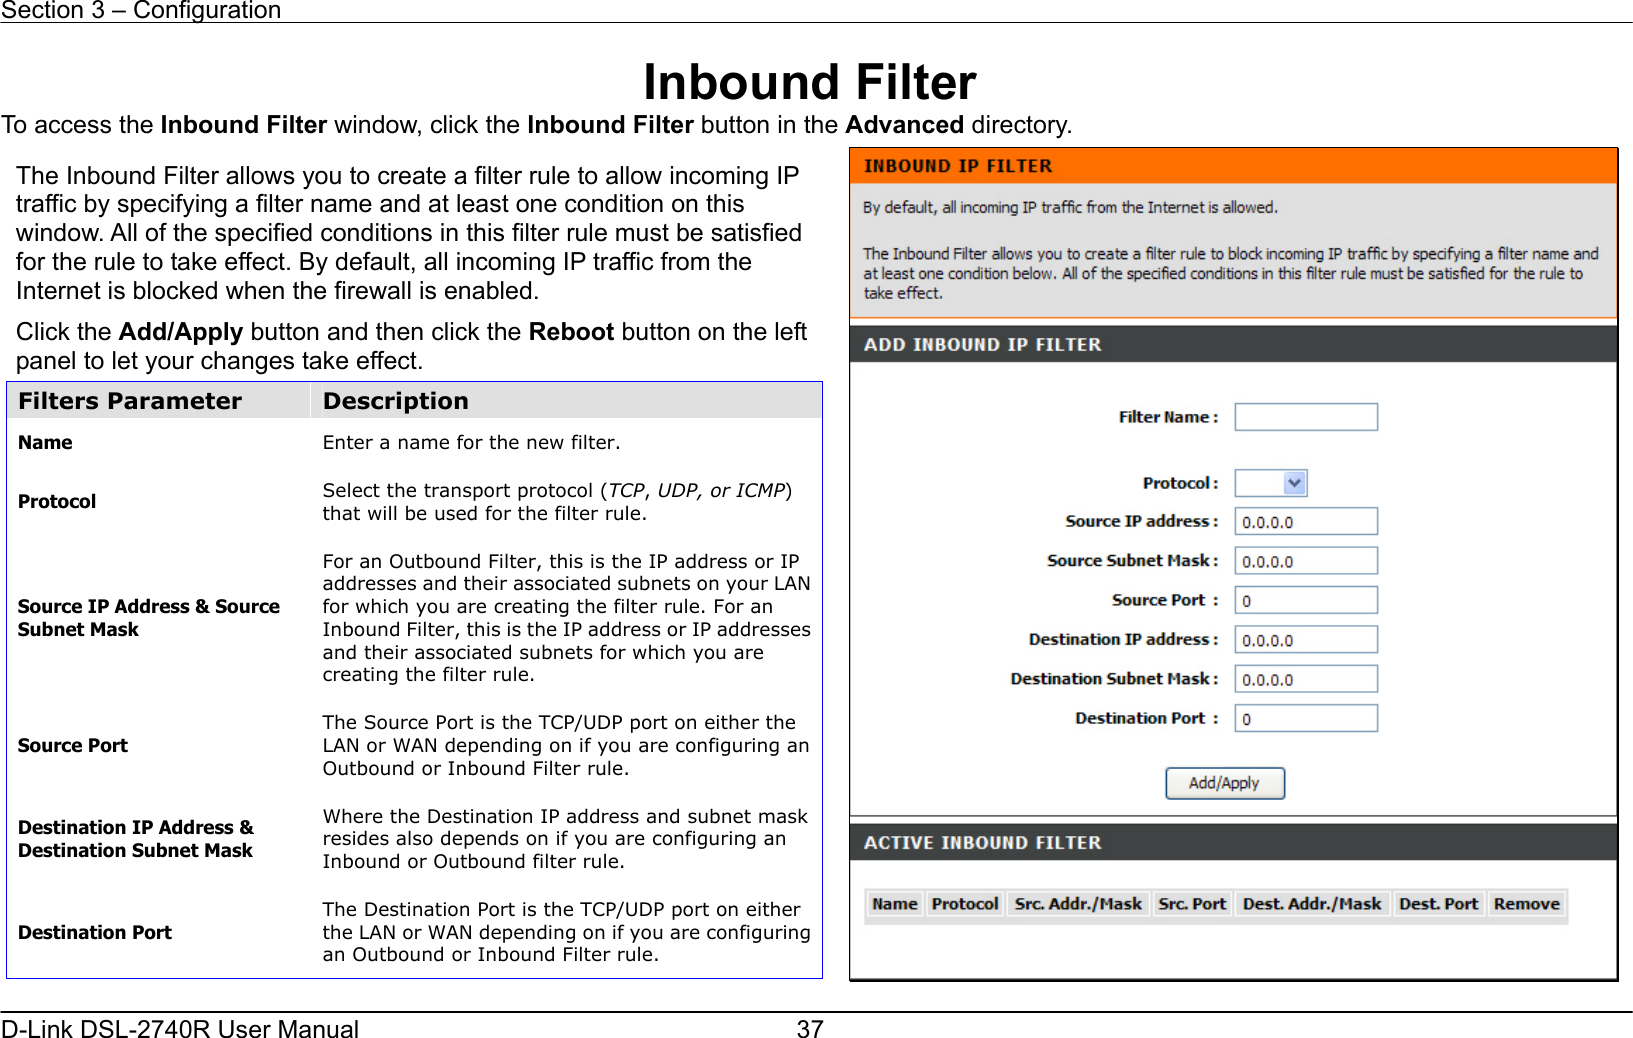 Section 3 – Configuration   D-Link DSL-2740R User Manual  37Inbound Filter To access the Inbound Filter window, click the Inbound Filter button in the Advanced directory.  The Inbound Filter allows you to create a filter rule to allow incoming IP traffic by specifying a filter name and at least one condition on this window. All of the specified conditions in this filter rule must be satisfied for the rule to take effect. By default, all incoming IP traffic from the Internet is blocked when the firewall is enabled.     Click the Add/Apply button and then click the Reboot button on the left panel to let your changes take effect. Filters Parameter  Description Name  Enter a name for the new filter. Protocol  Select the transport protocol (TCP, UDP, or ICMP) that will be used for the filter rule.   Source IP Address &amp; Source Subnet Mask For an Outbound Filter, this is the IP address or IP addresses and their associated subnets on your LAN for which you are creating the filter rule. For an Inbound Filter, this is the IP address or IP addresses and their associated subnets for which you are creating the filter rule.   Source Port The Source Port is the TCP/UDP port on either the LAN or WAN depending on if you are configuring an Outbound or Inbound Filter rule. Destination IP Address &amp; Destination Subnet Mask Where the Destination IP address and subnet mask resides also depends on if you are configuring an Inbound or Outbound filter rule.   Destination Port The Destination Port is the TCP/UDP port on either the LAN or WAN depending on if you are configuring an Outbound or Inbound Filter rule.   